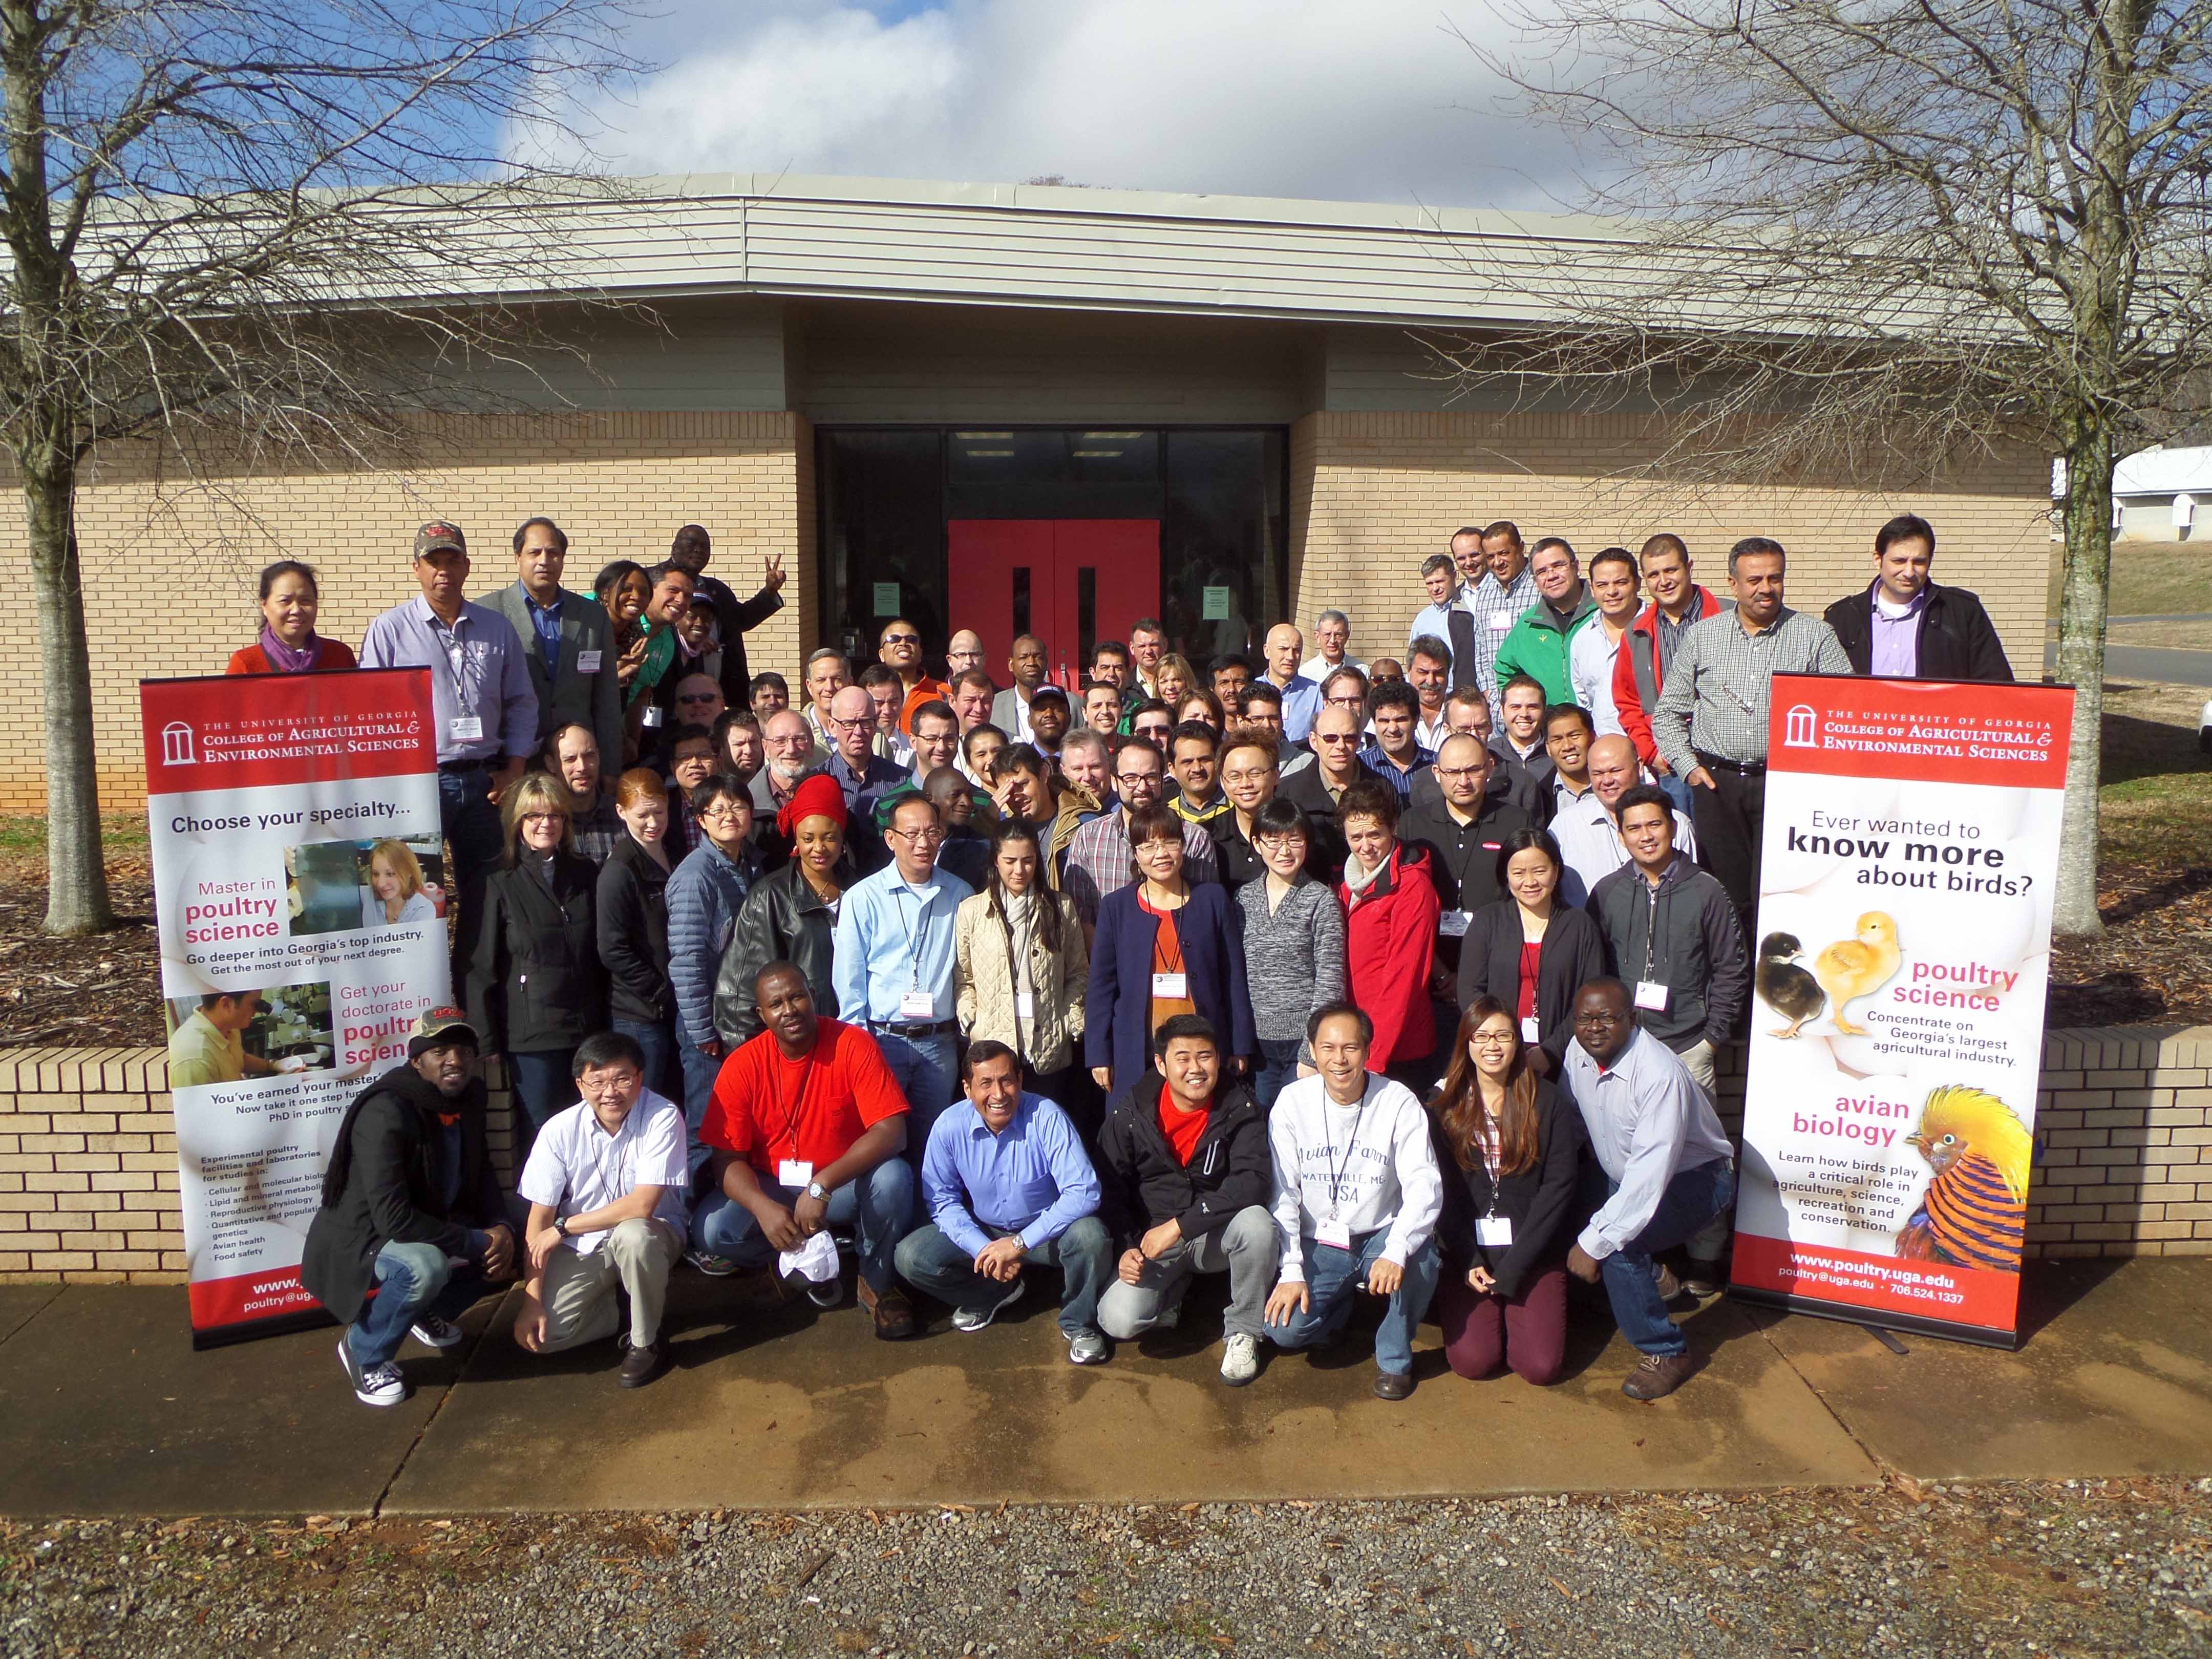 More than 70 poultry farmers and scientists from around the world and the U.S. flocked to Georgia this week for the UGA Department of Poultry Sciences International Short Course.